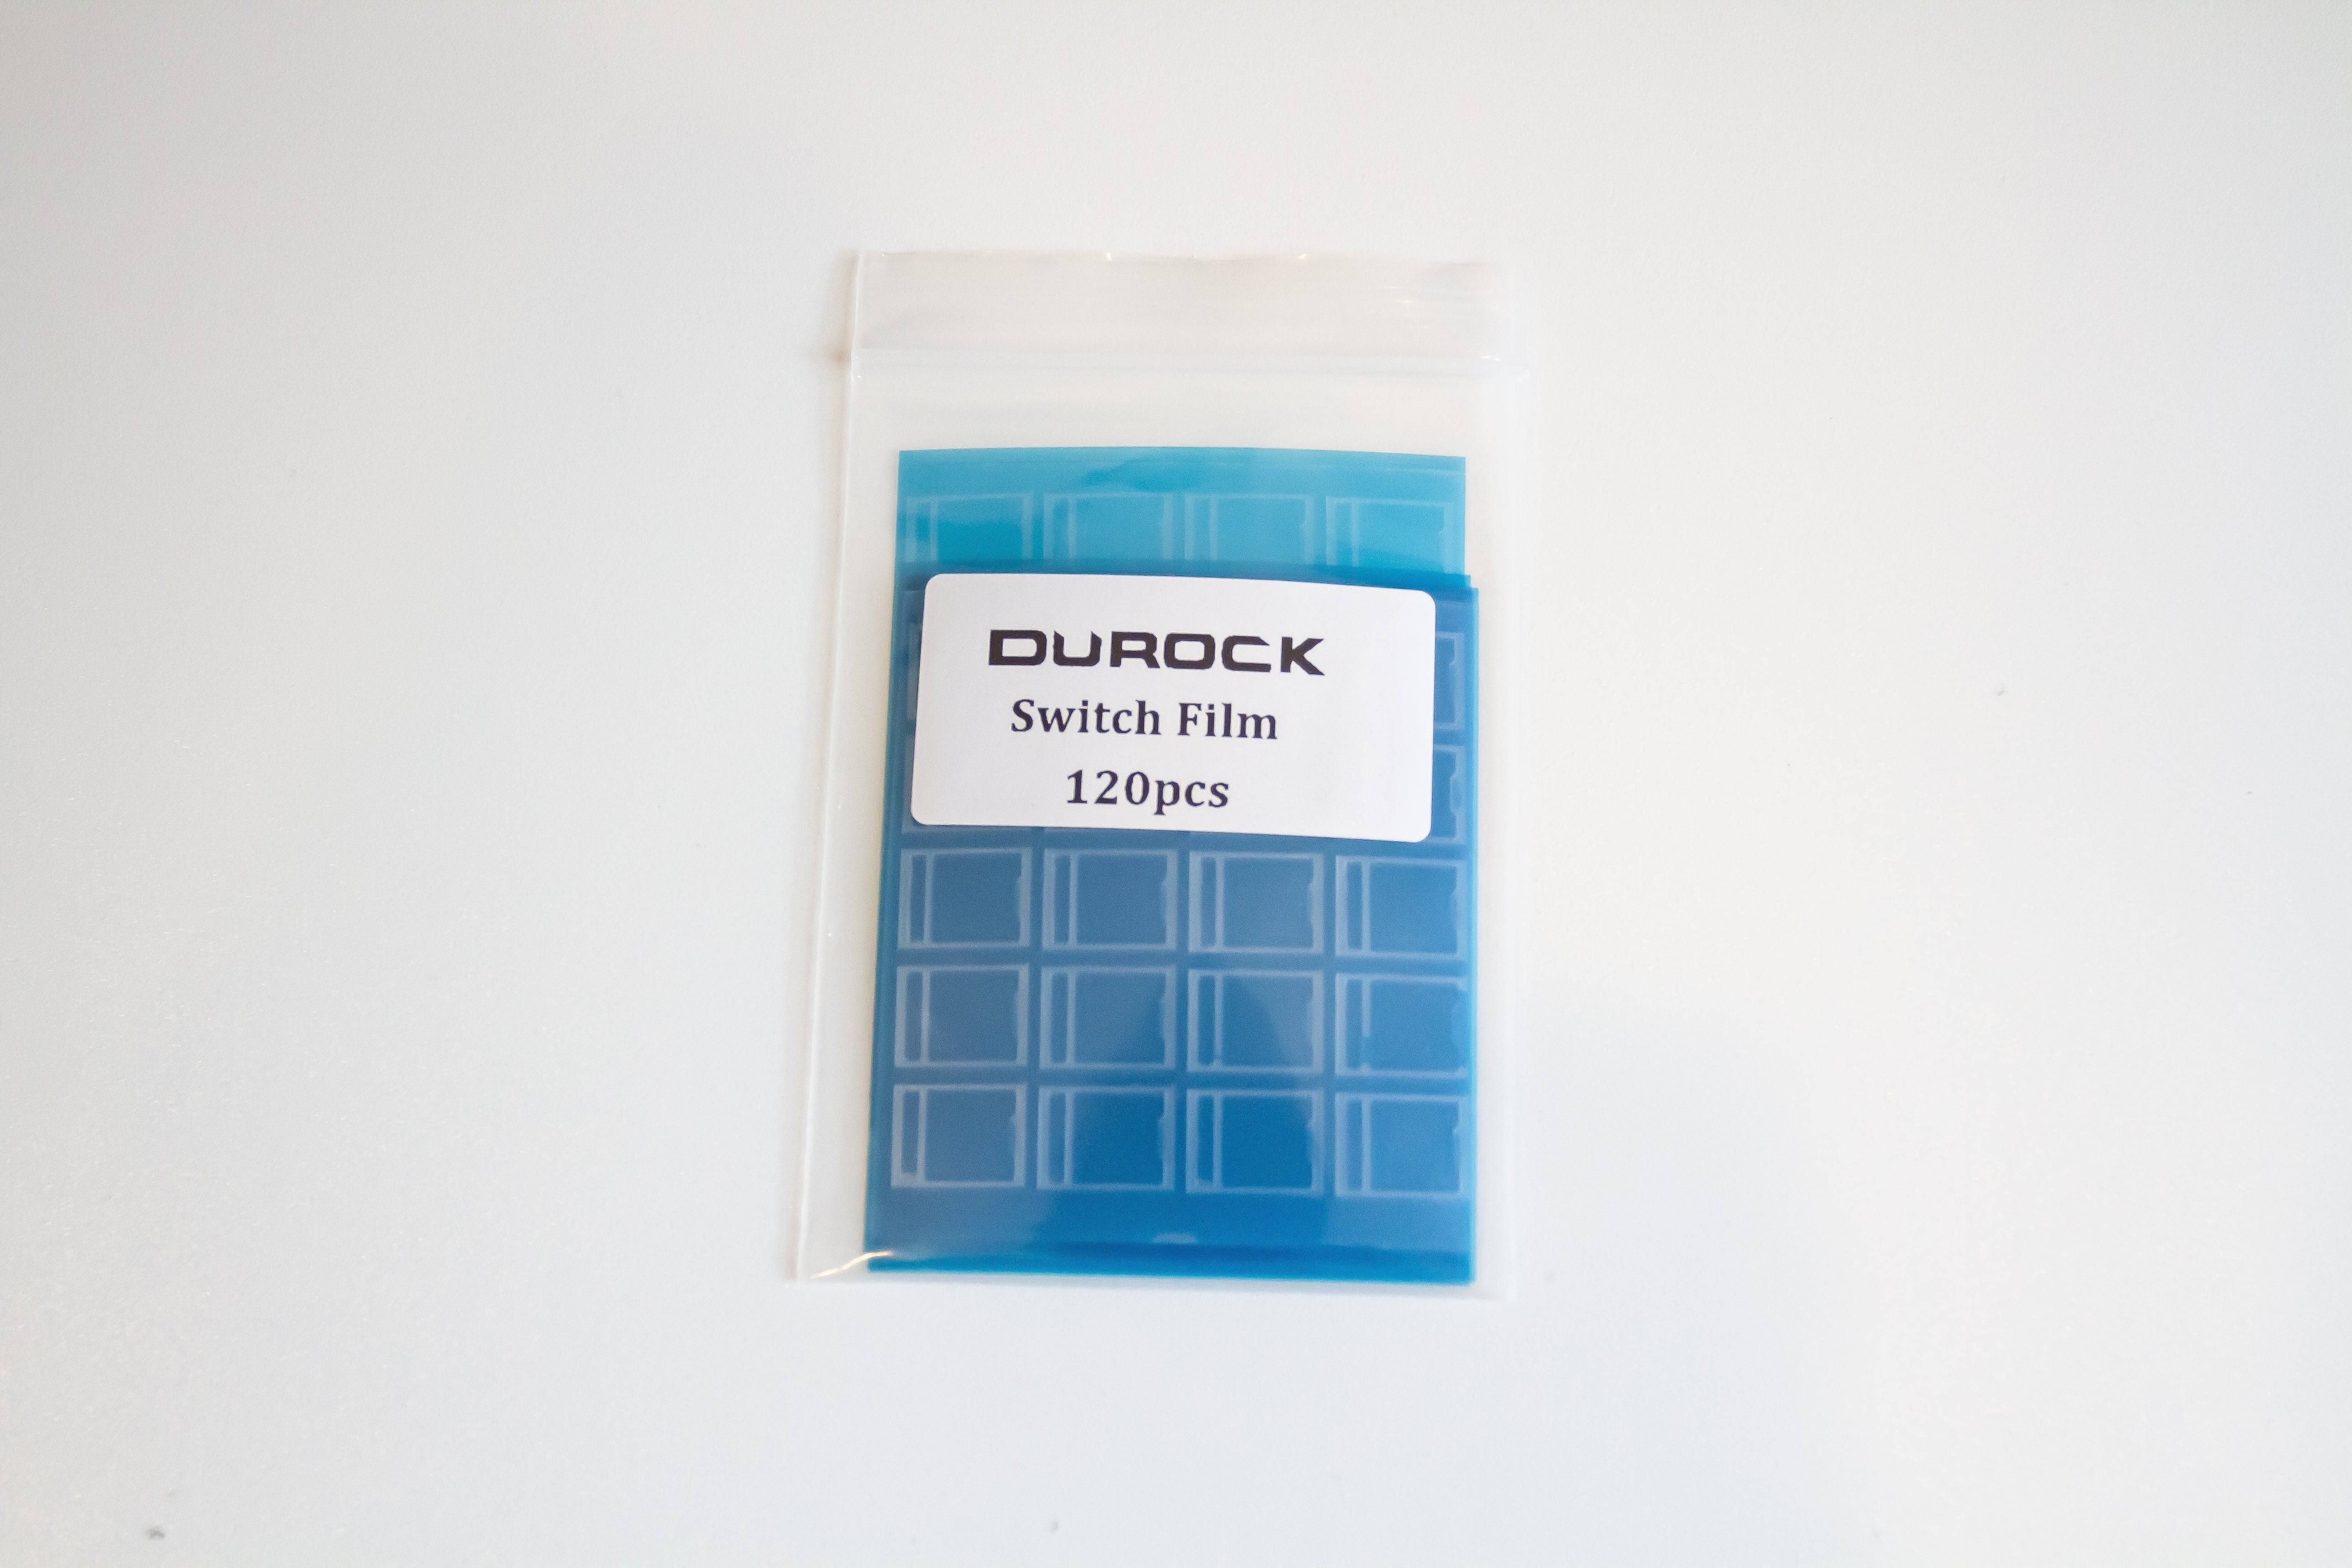 A pack of Durock Mechanical key switch films.